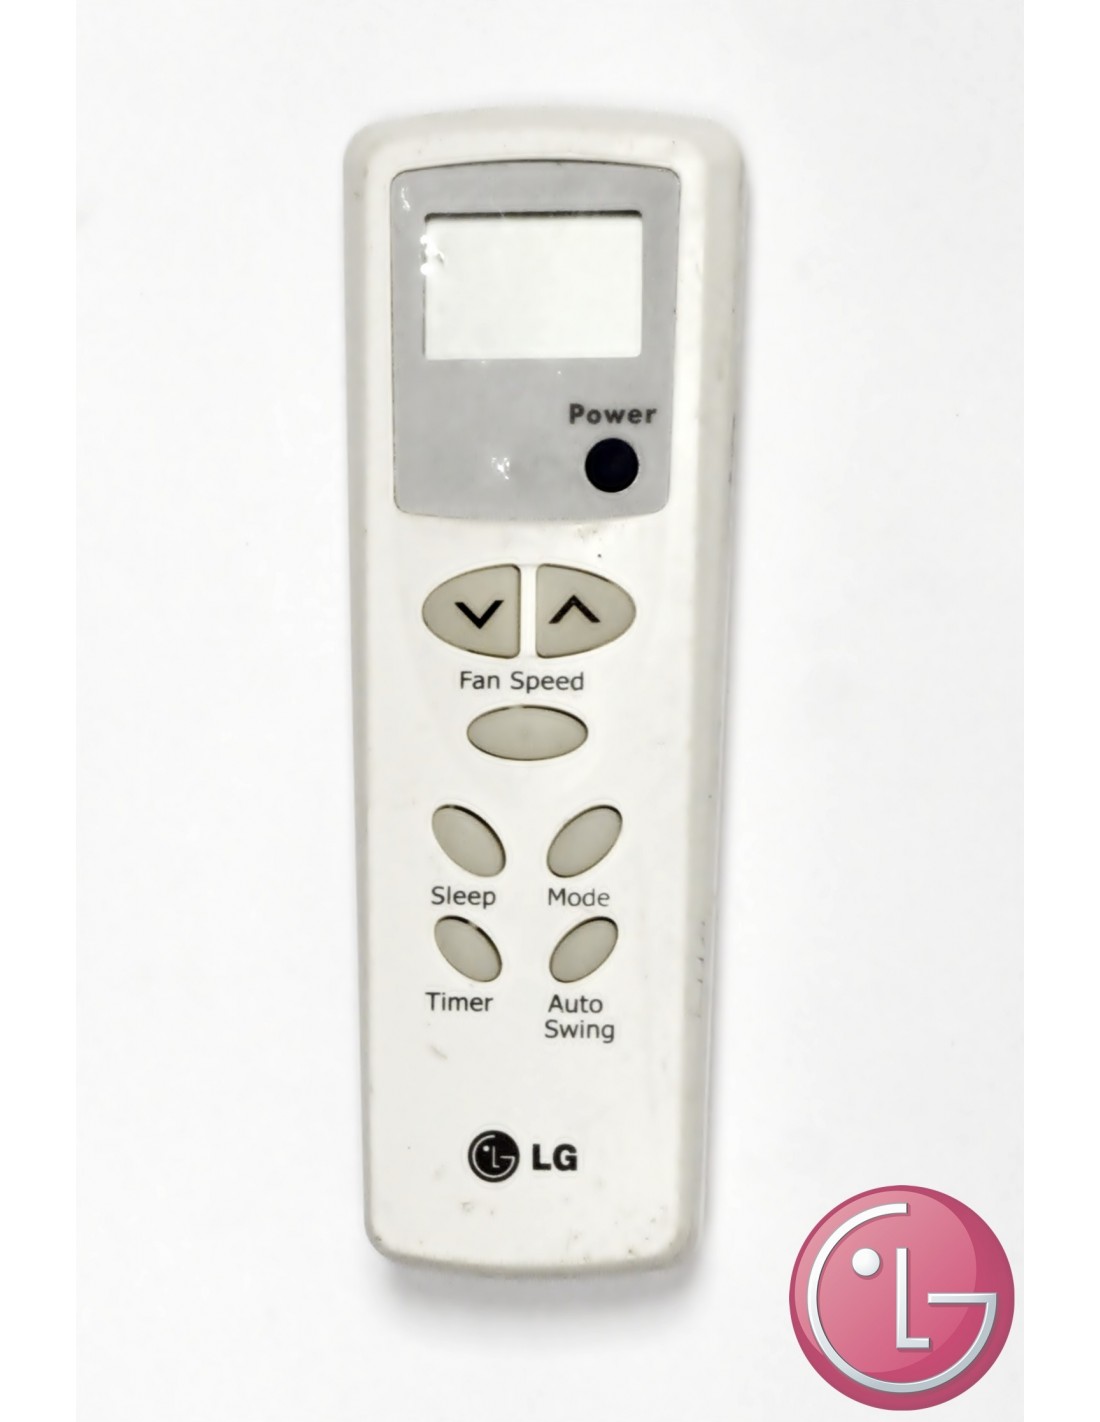 Buy LG AC Remote Online in India only @